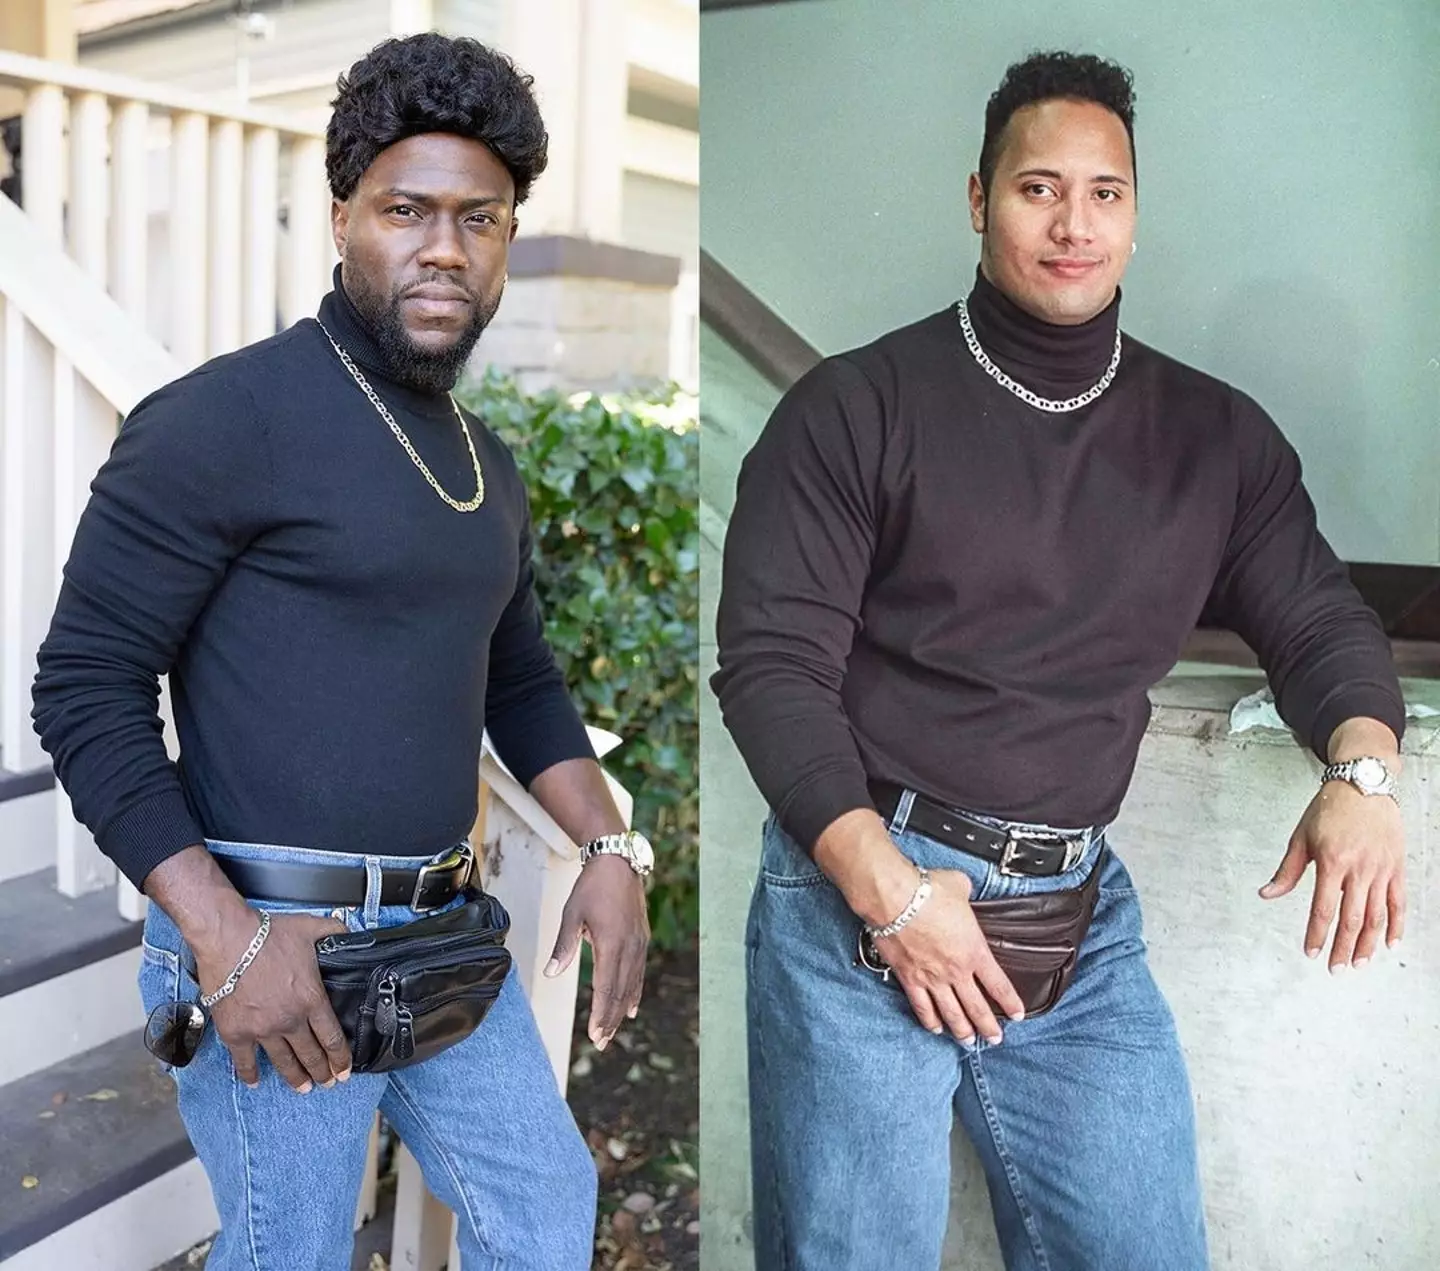 Kevin Hart as The Rock and The Rock as The Rock.